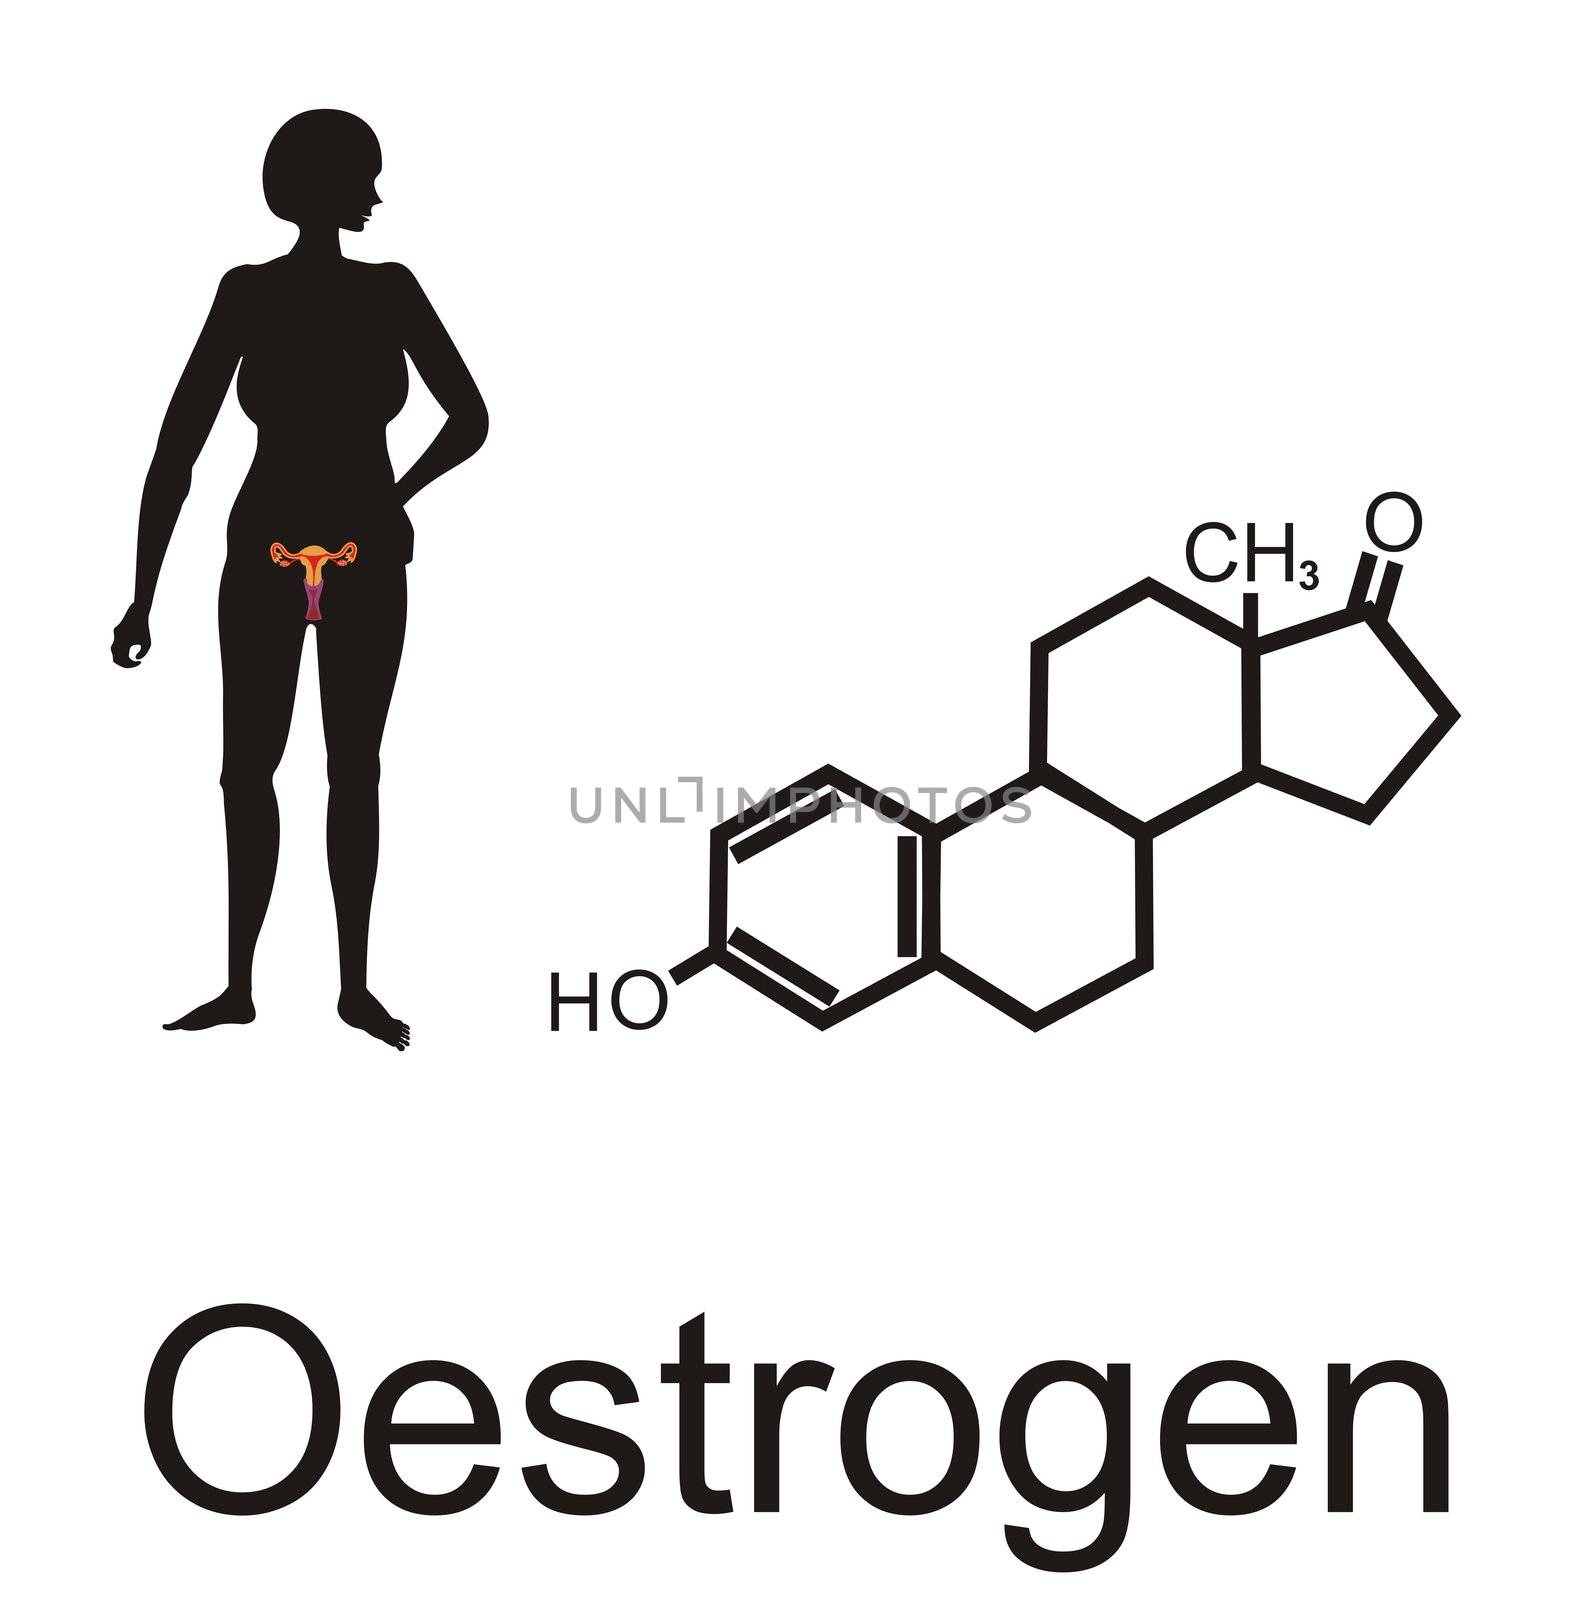 Female silhouette with reproductive organs and oestrogen formula